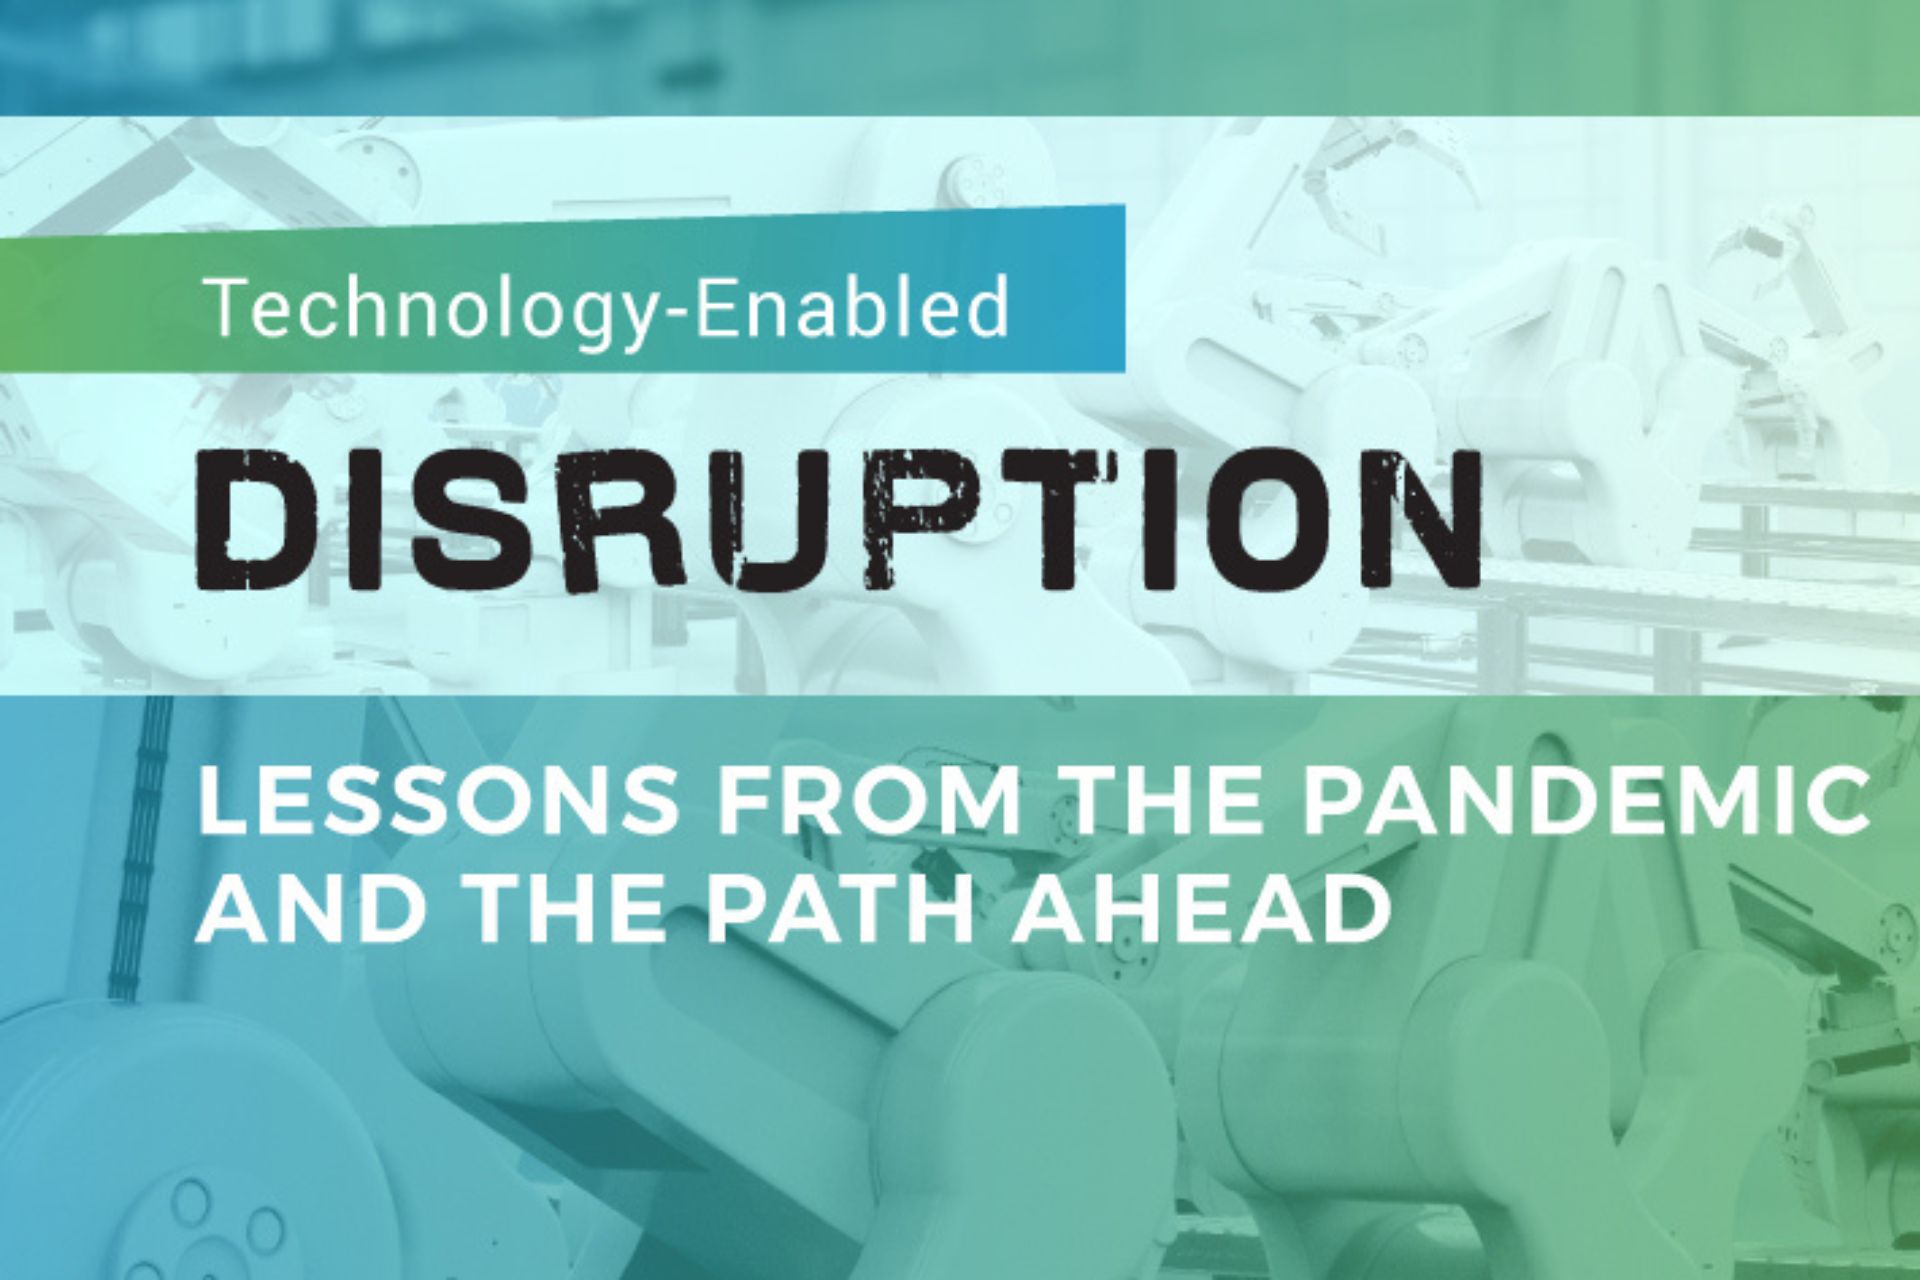 2022 Technology-Enabled Disruption Conference Lessons from the Pandemic and the Path Ahead